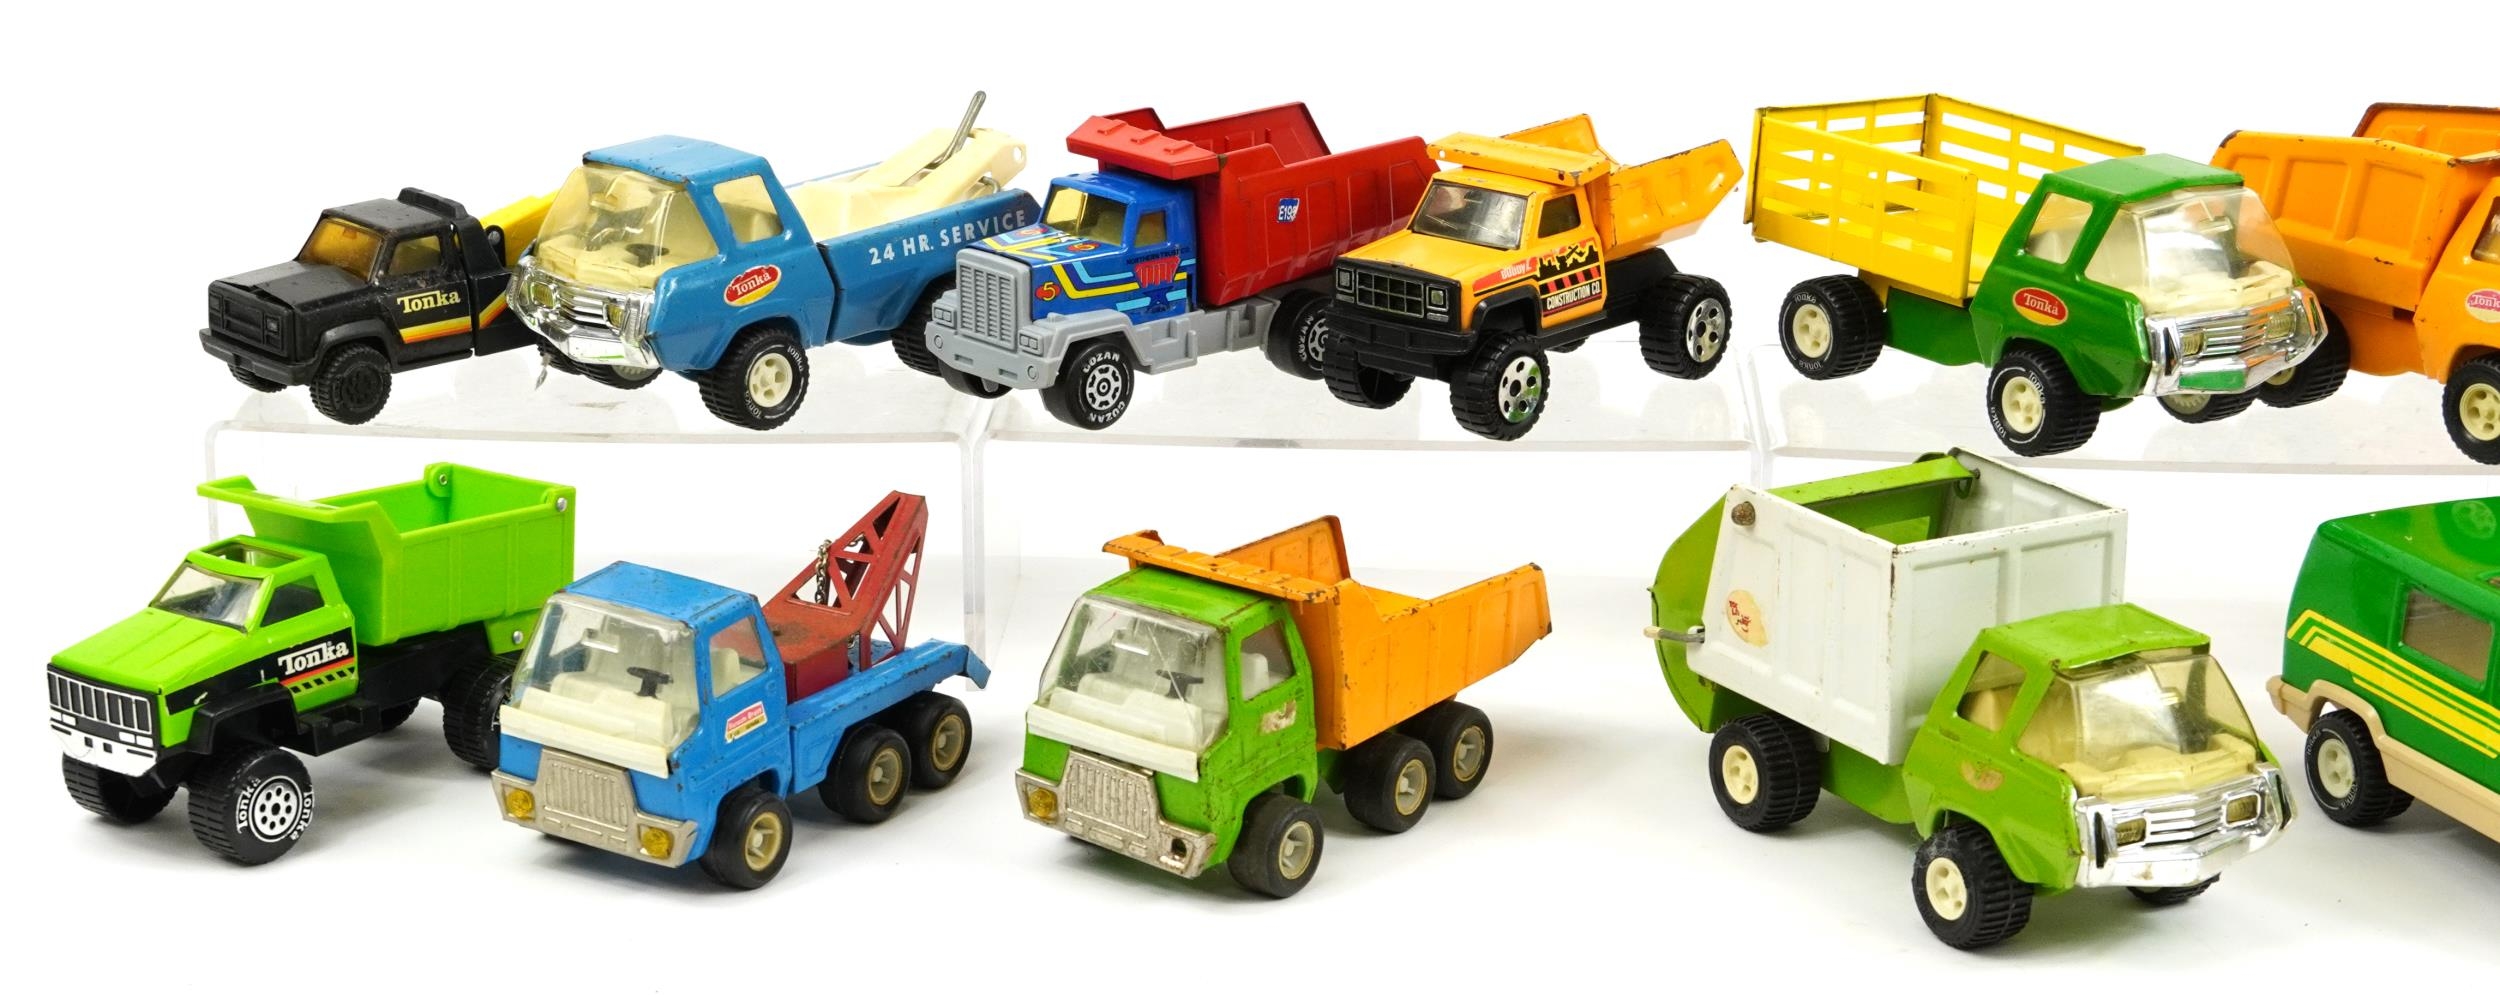 14 vintage tinplate vehicles including Tonka and Buddy, the largest 26cm in length - Image 2 of 3